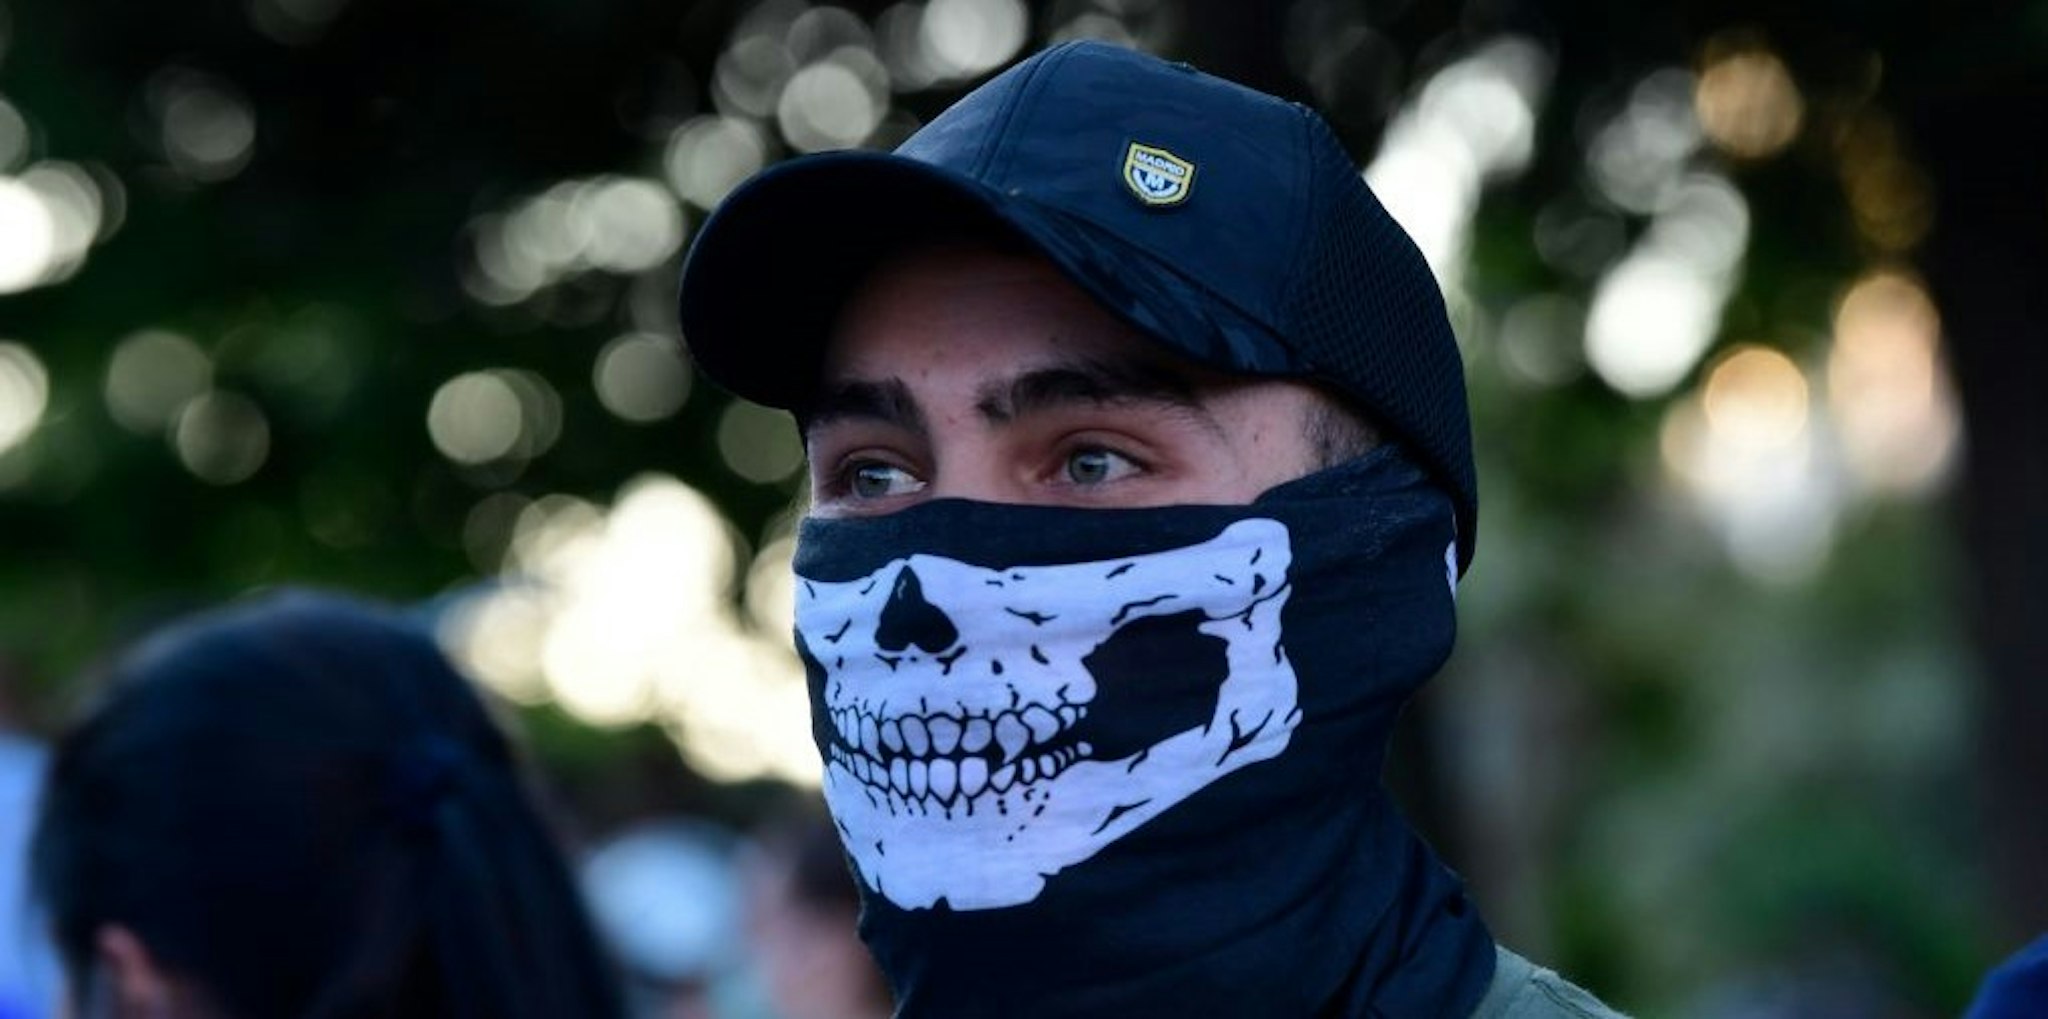 A demonstrator covers his face with a neck gaiter as he takes part in a demonstration against the government's handling of the coronavirus crisis, on May 20, 2020, in Alcorcon, near Madrid. - Spain's prime minister won parliamentary backing extend the lockdown for another two weeks today, despite opposition from his rightwing opponents and protests against his minority coalition government. It was the fifth time the state of emergency has been renewed, meaning the restrictions will remain in force until June 6 in a measure passed by 177 votes in favour, 162 against and 11 abstentions. (Photo by JAVIER SORIANO / AFP) (Photo by